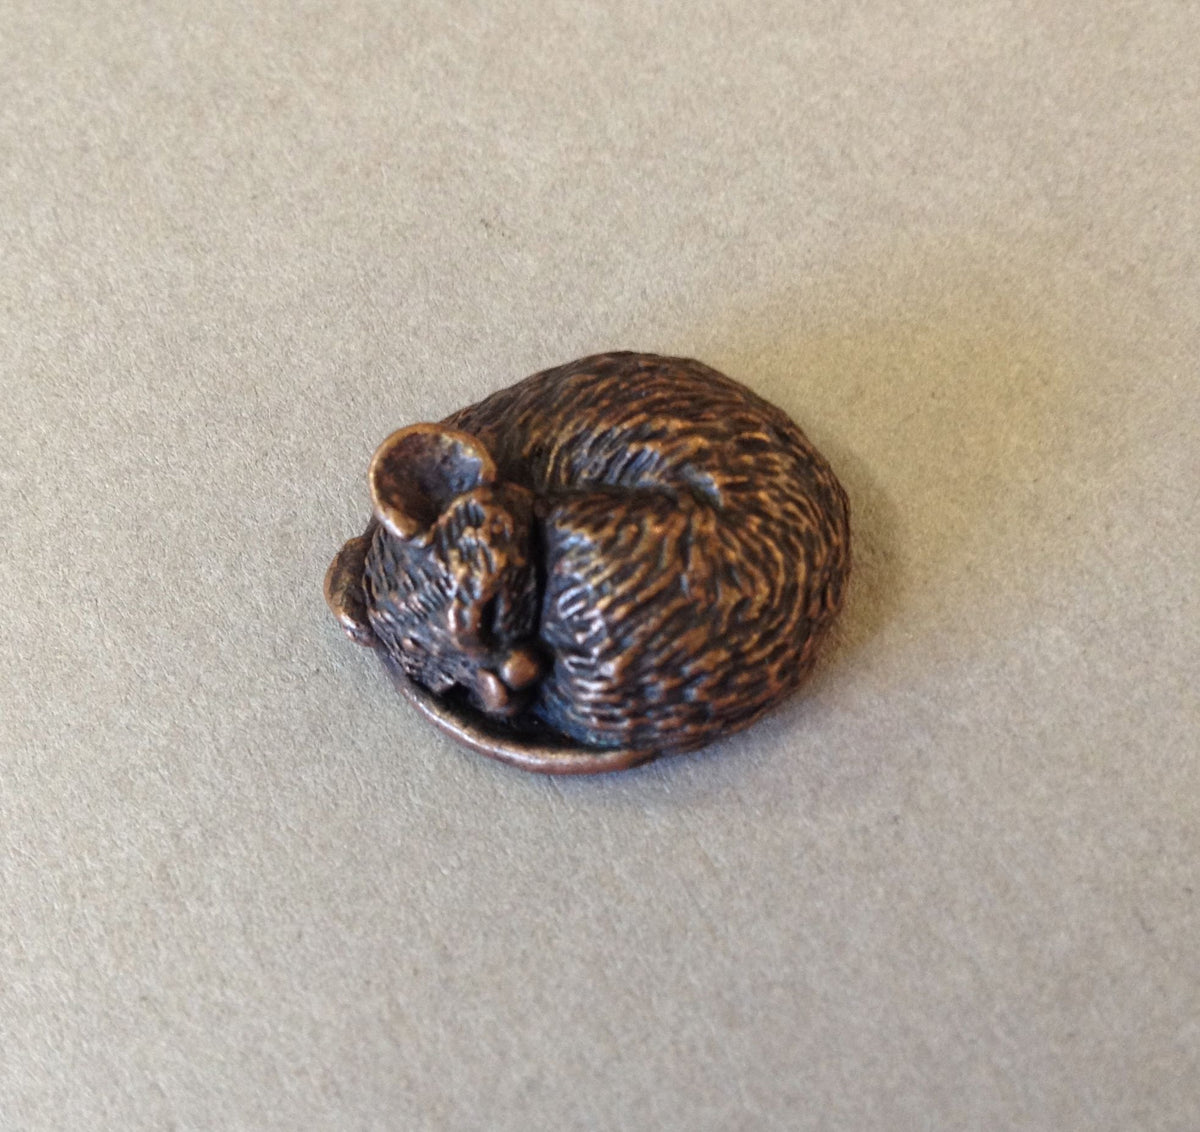 Miniature Sleeping Mouse by David Meredith